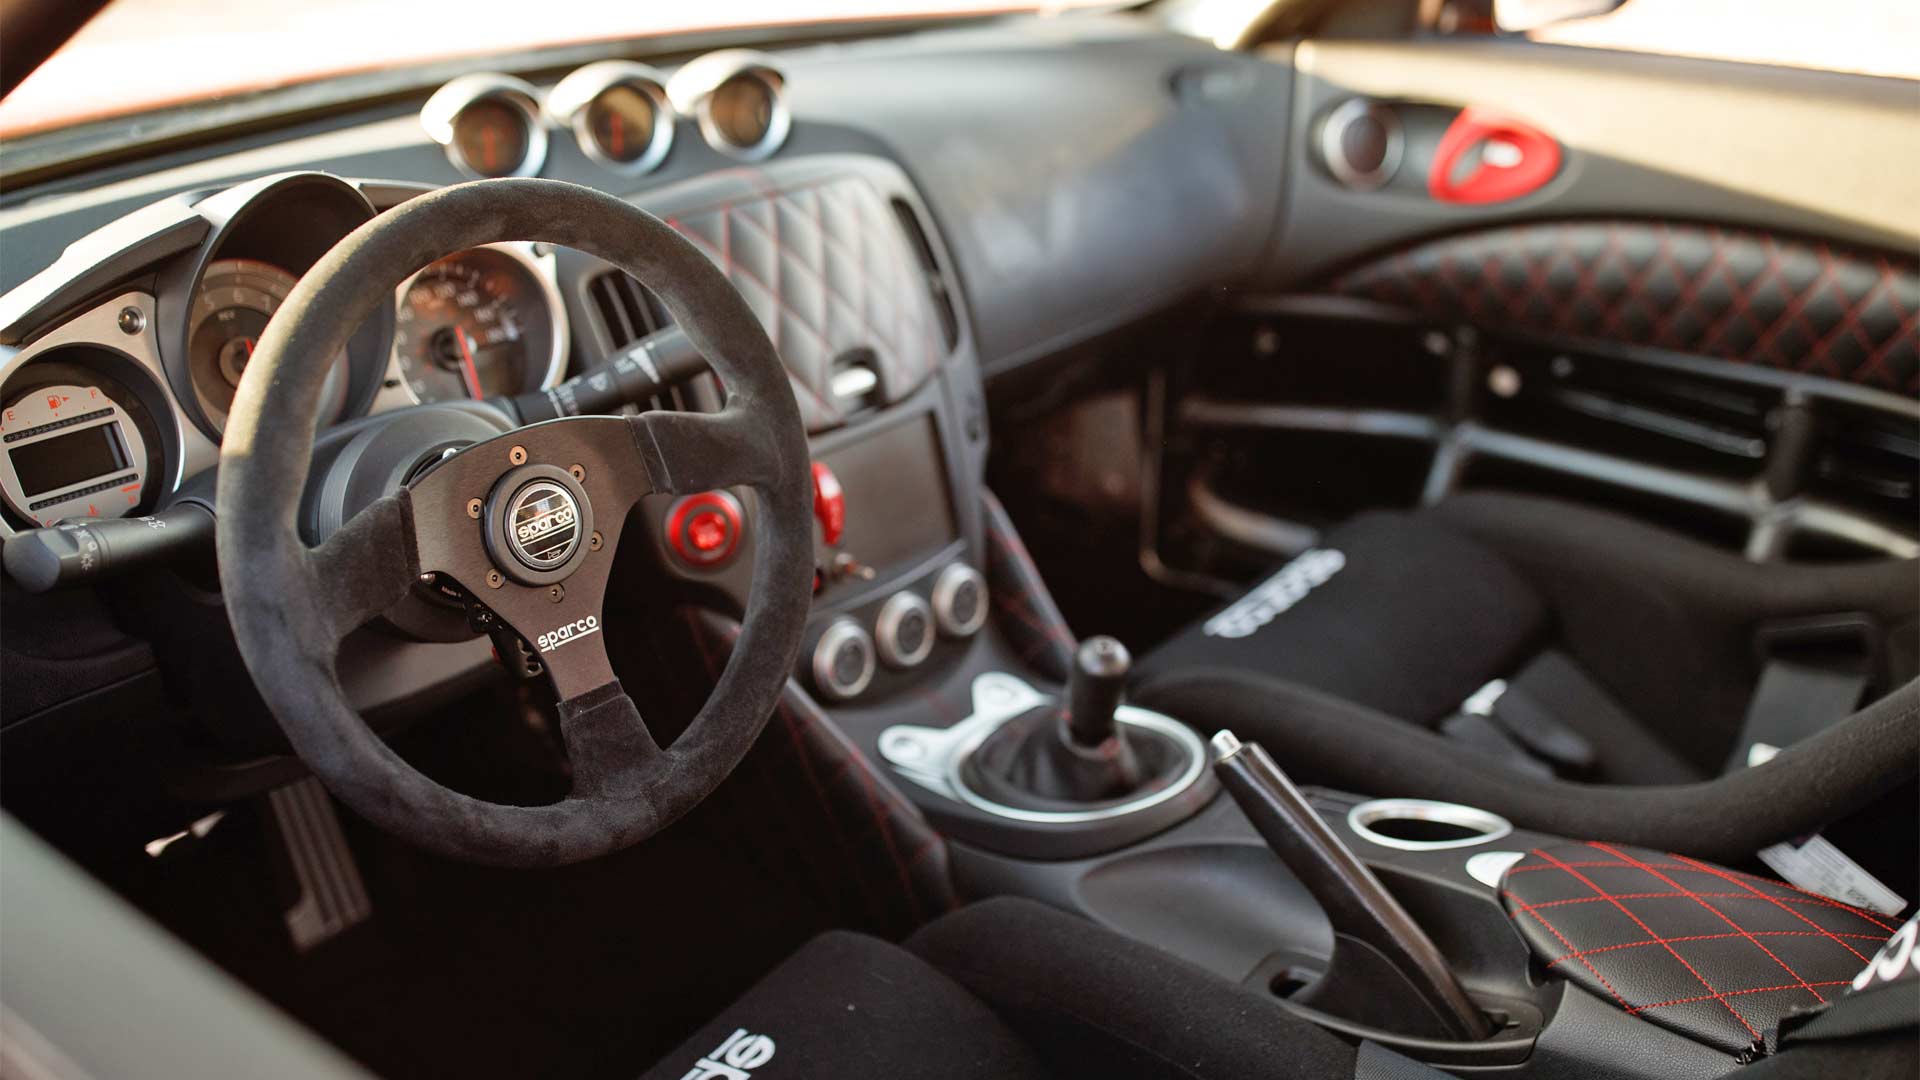 Nissan-370Z-Project-Clubsport-23-Interior